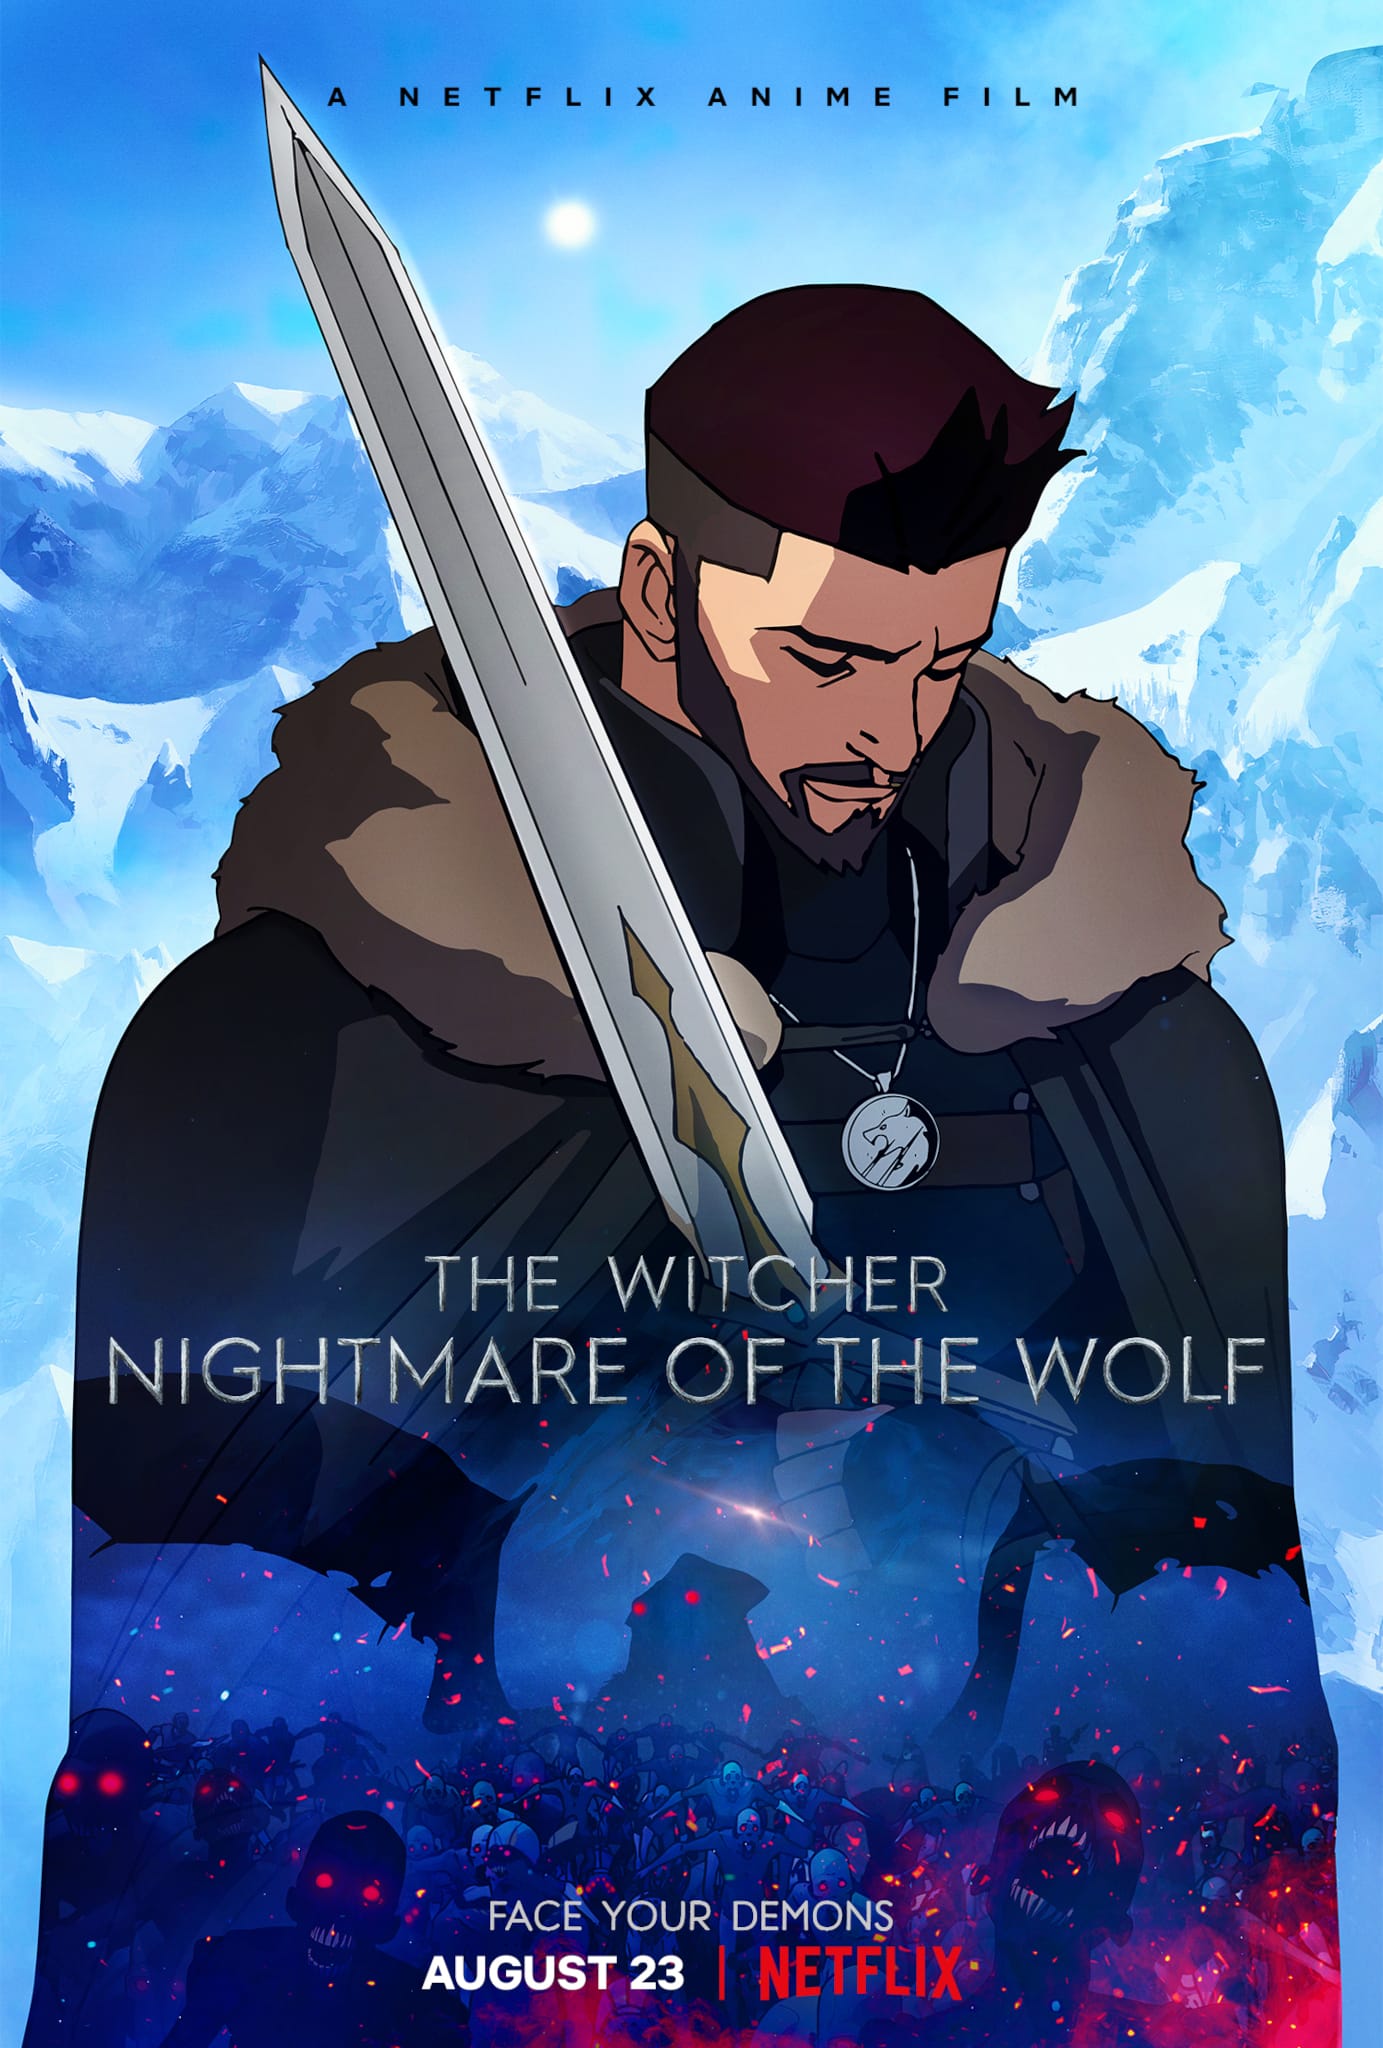 Trailer pour anime film The Witcher : Nightmare of the Wolf